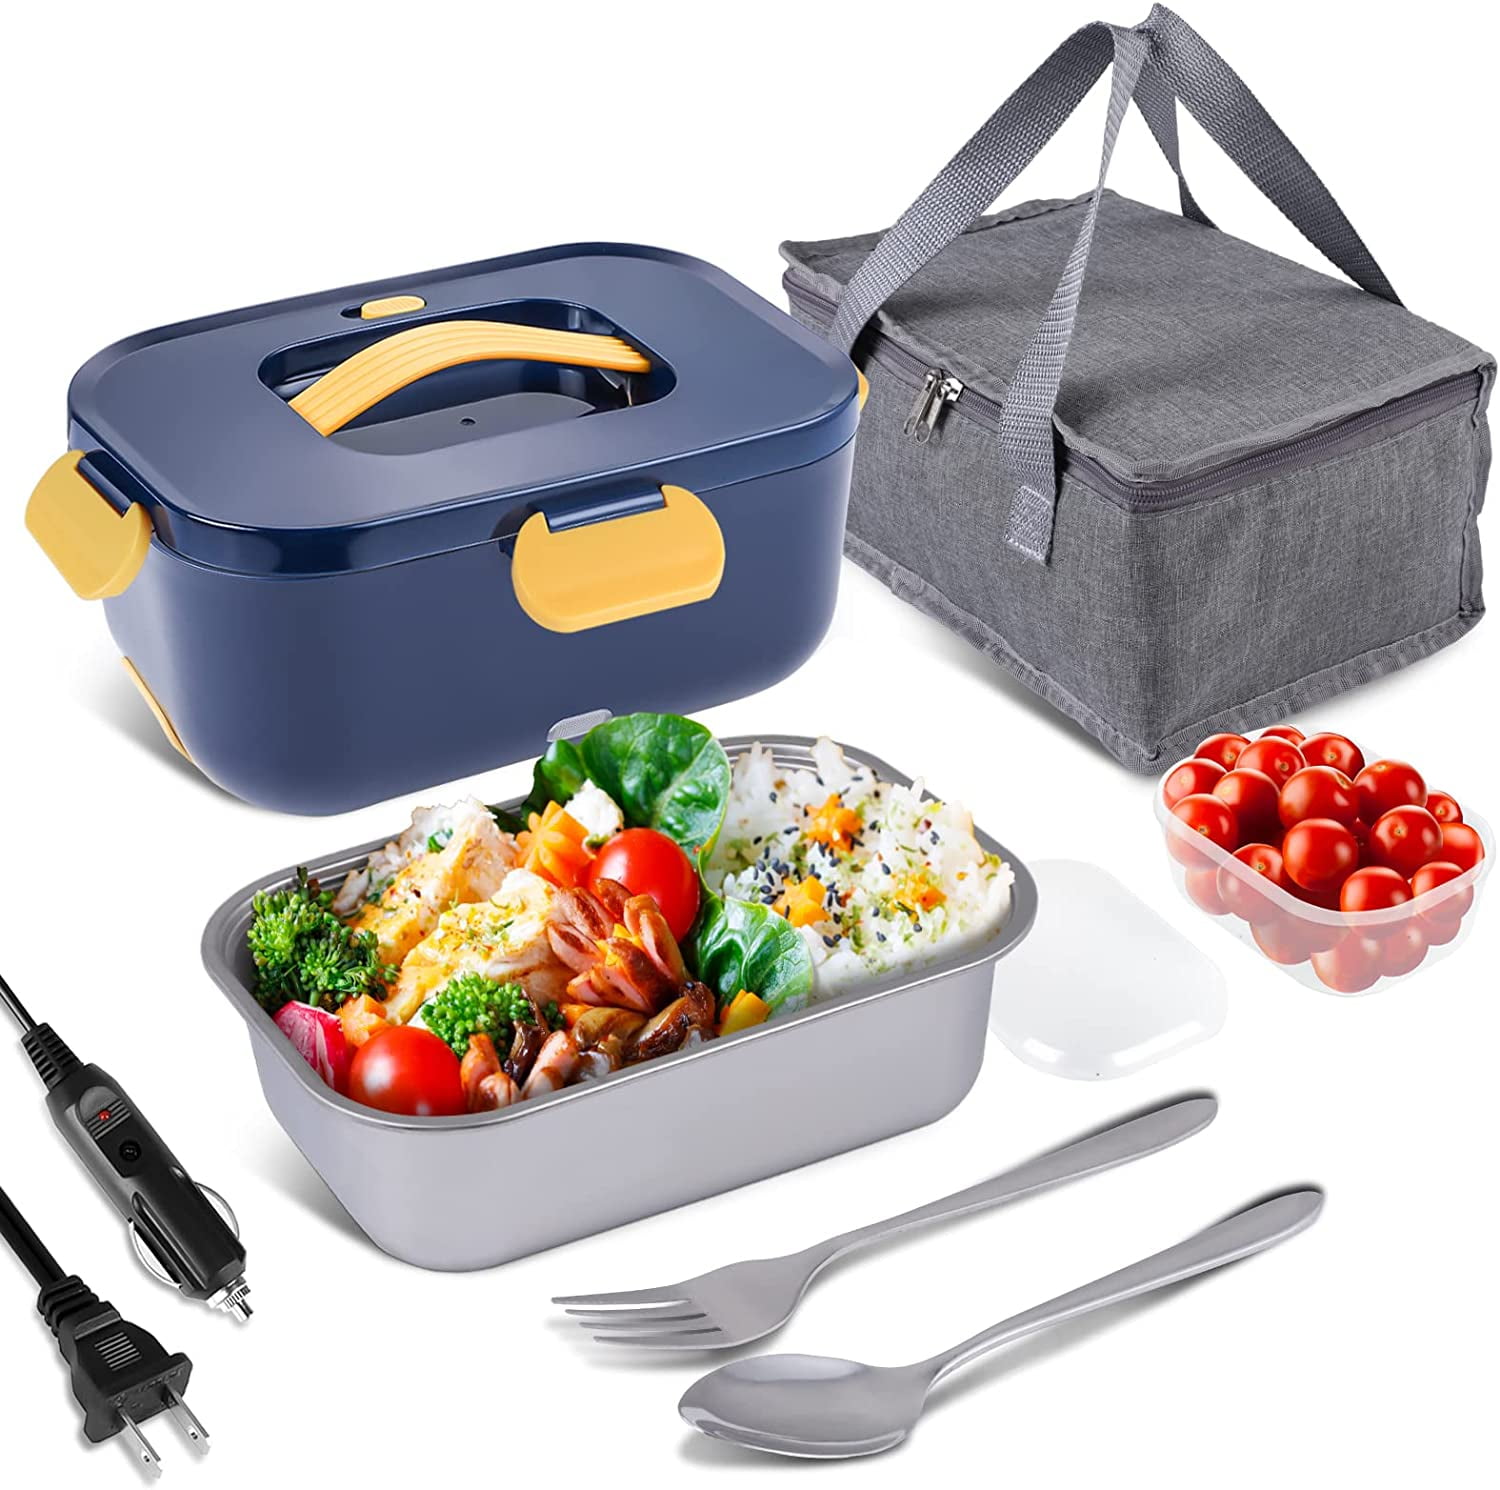  JIEGELIN electric lunch box for adults food heater,loncheras  electricas para calentar almuerzo,bento box adult hot lunch box self  heating portable food warmer for working men for car: Home & Kitchen